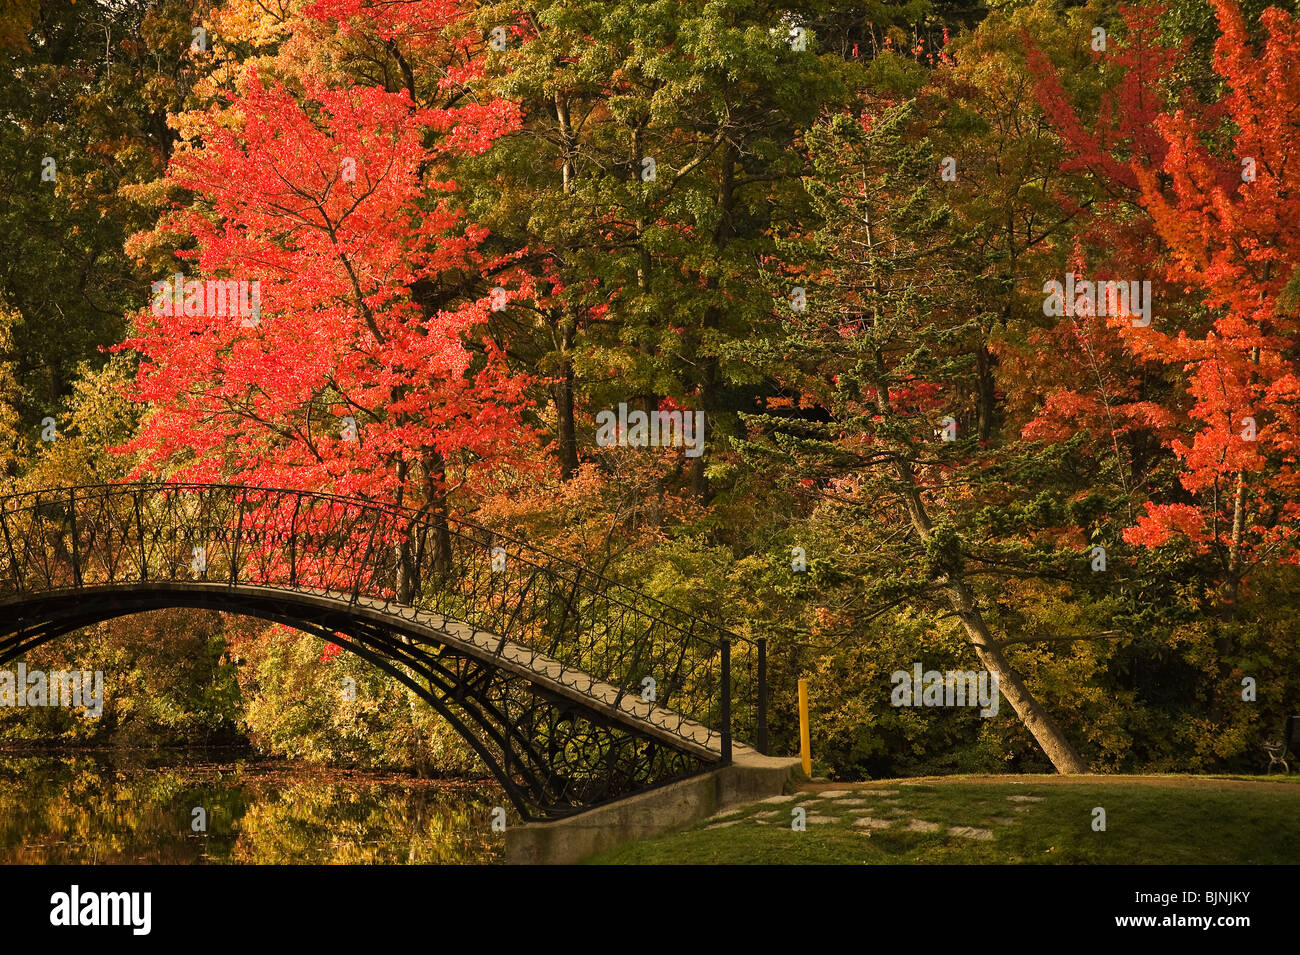 The Elm Park Bridge is one of the most recognizable landmarks in ...